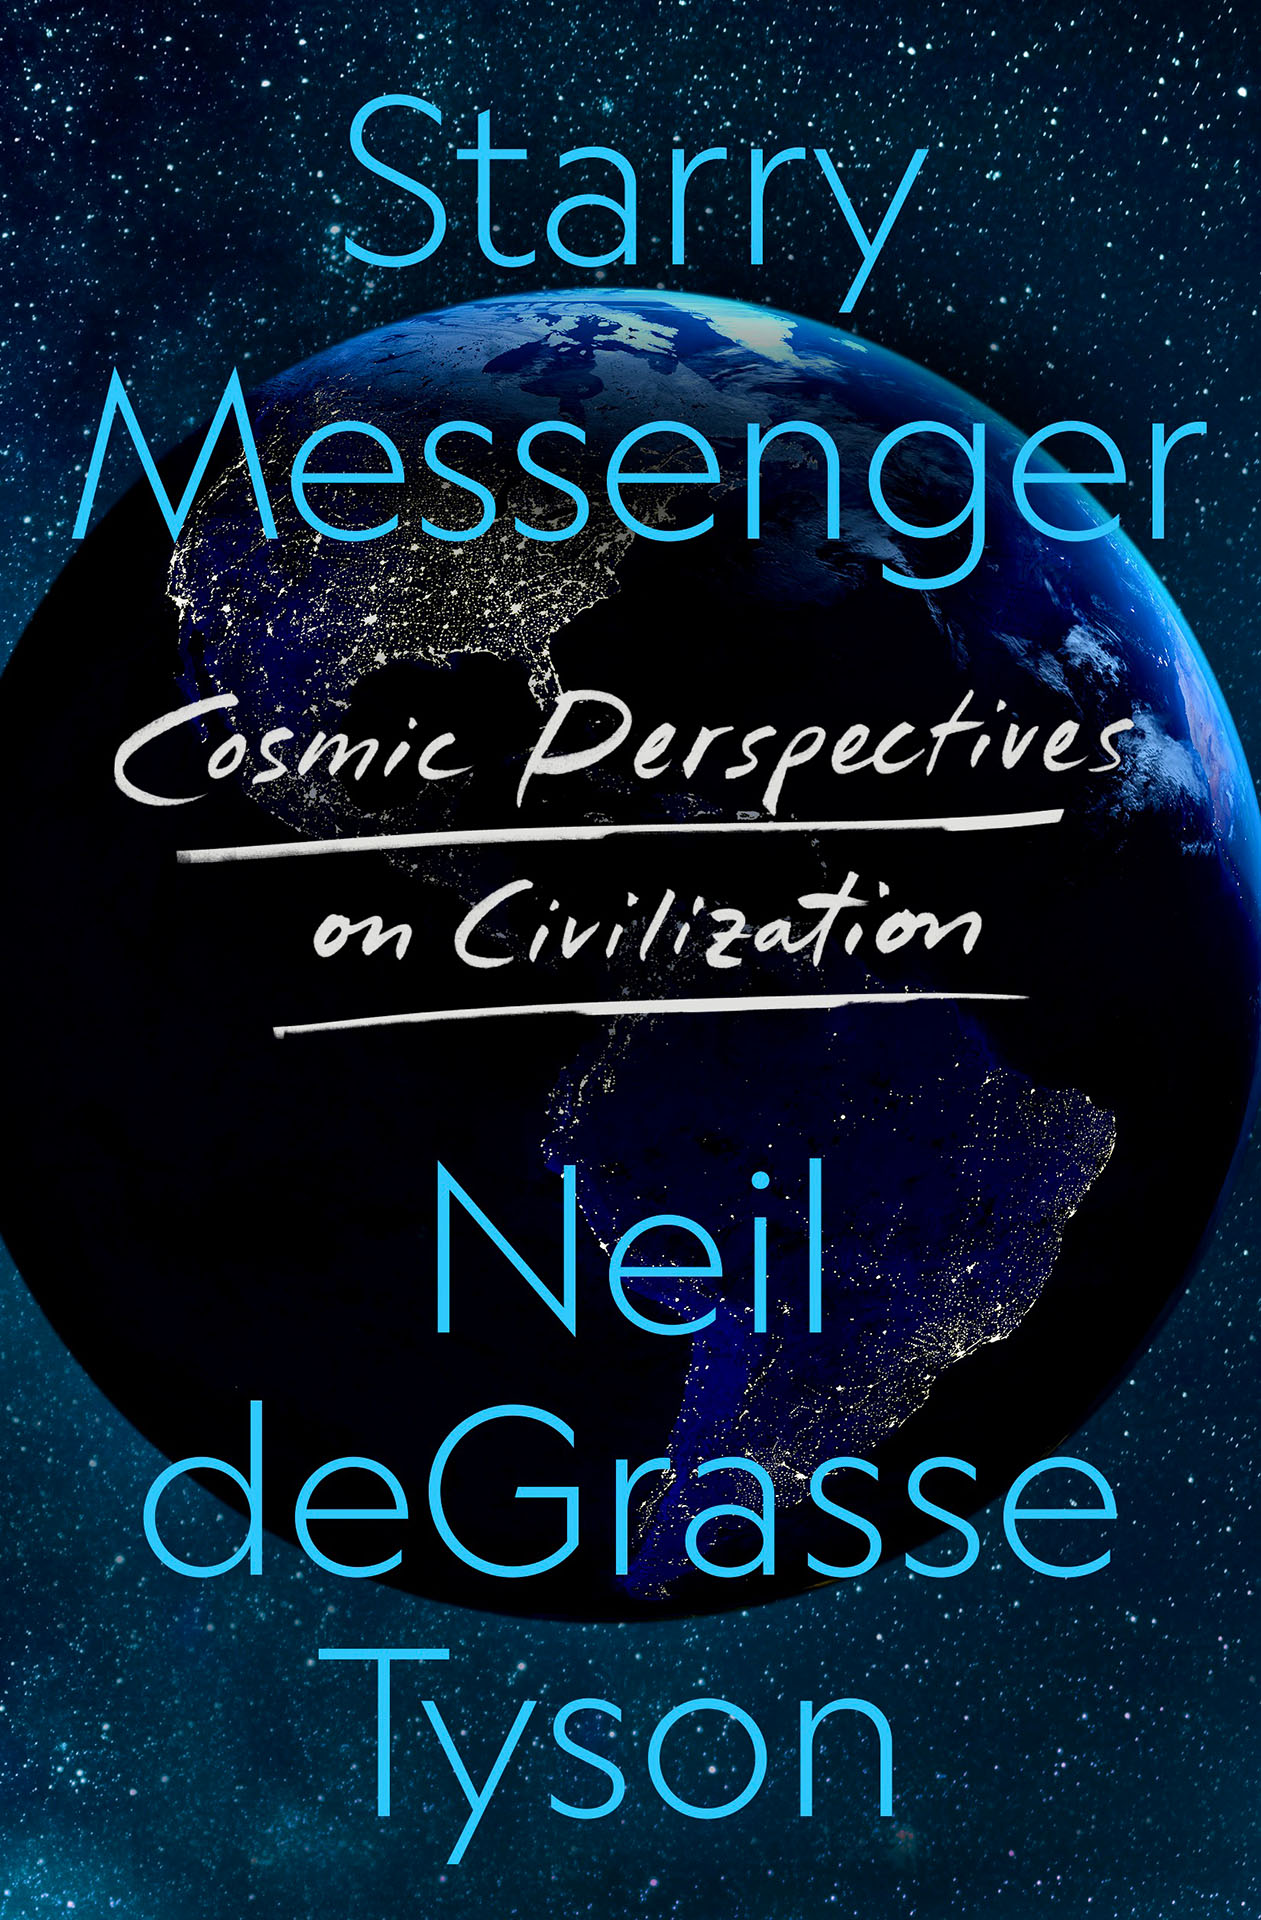 Link to the book Starry Messenger: Cosmic Perspectives on Civilization by Neil deGrasse Tyson.